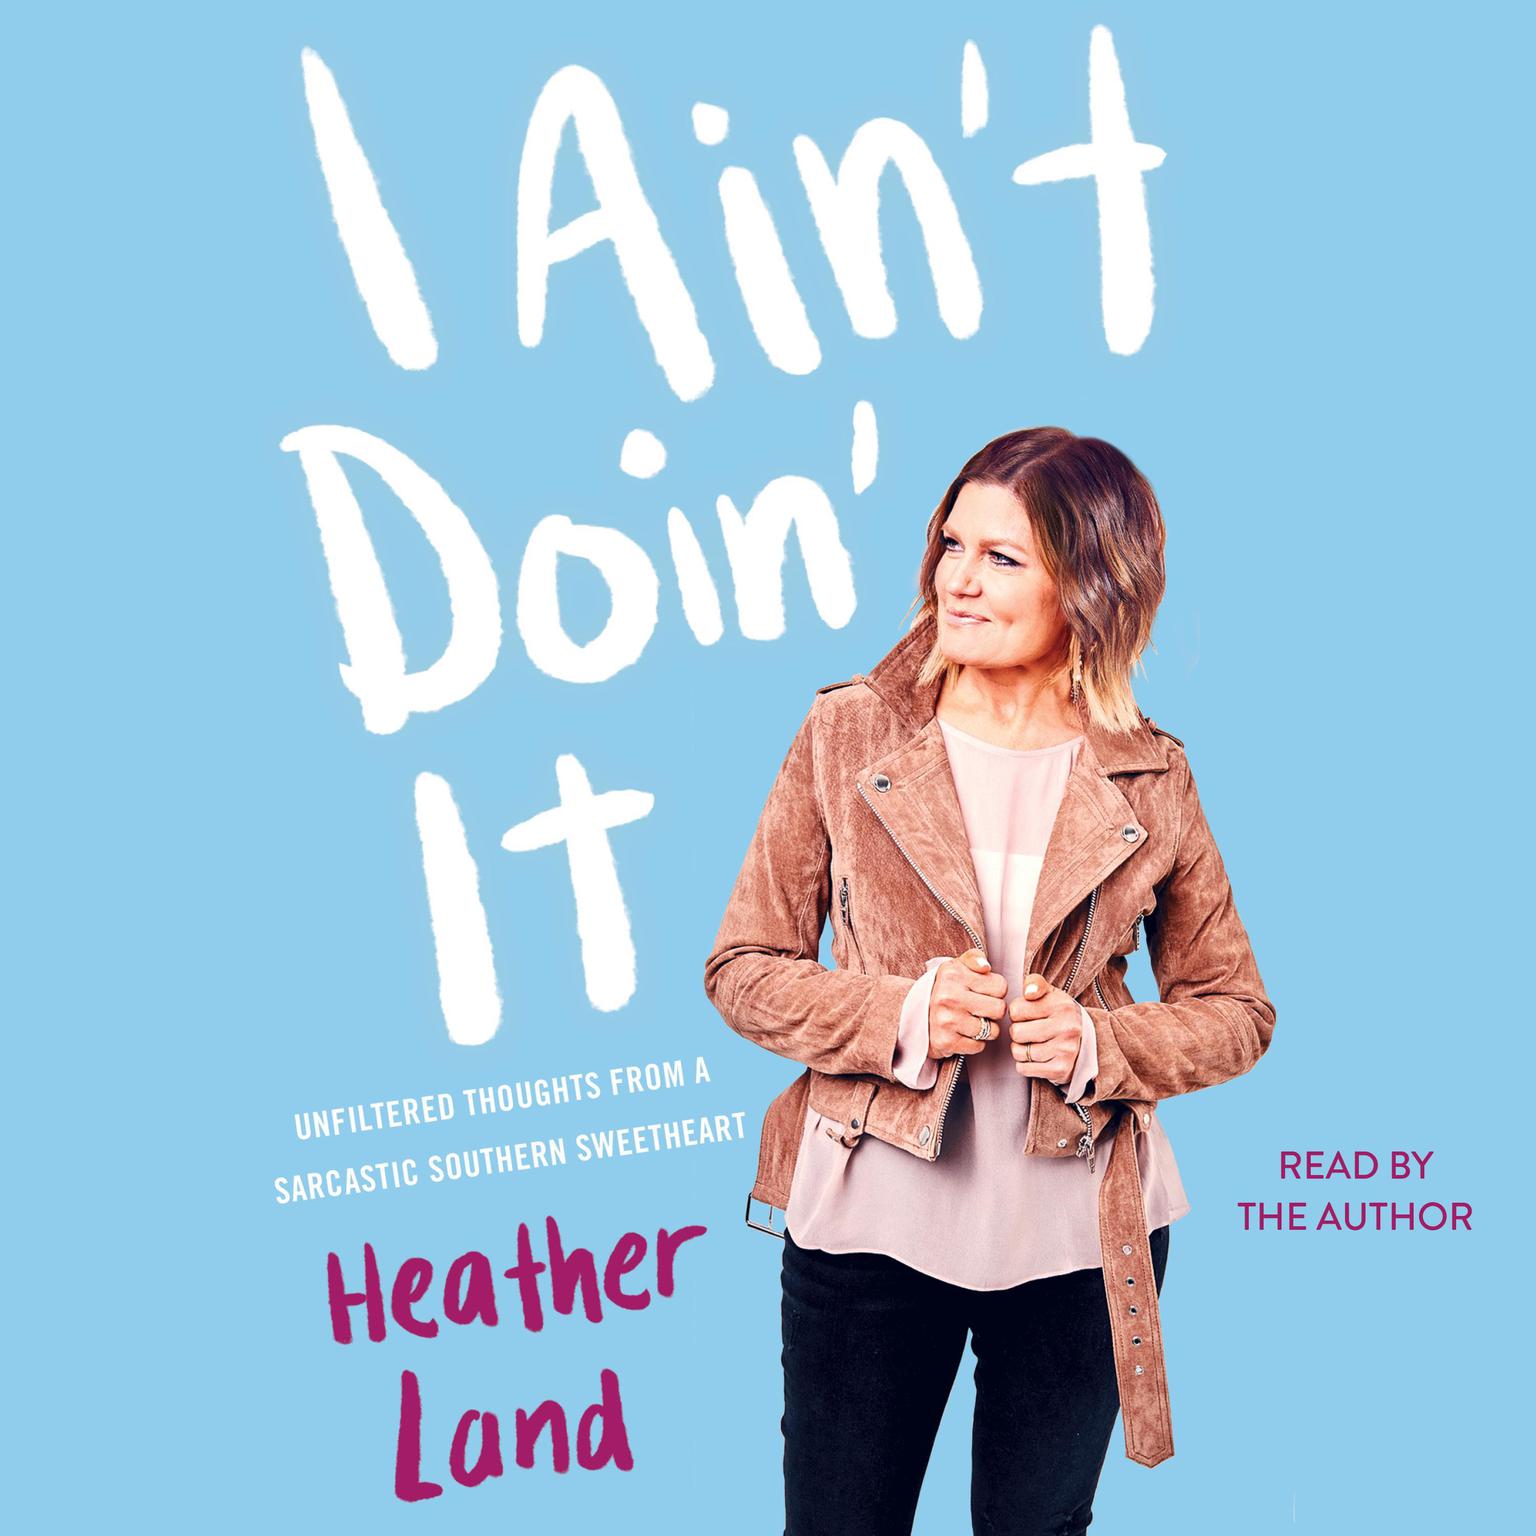 I Ain’t Doin’ It: Unfiltered Thoughts From a Sarcastic Southern Sweetheart Audiobook, by Heather Land